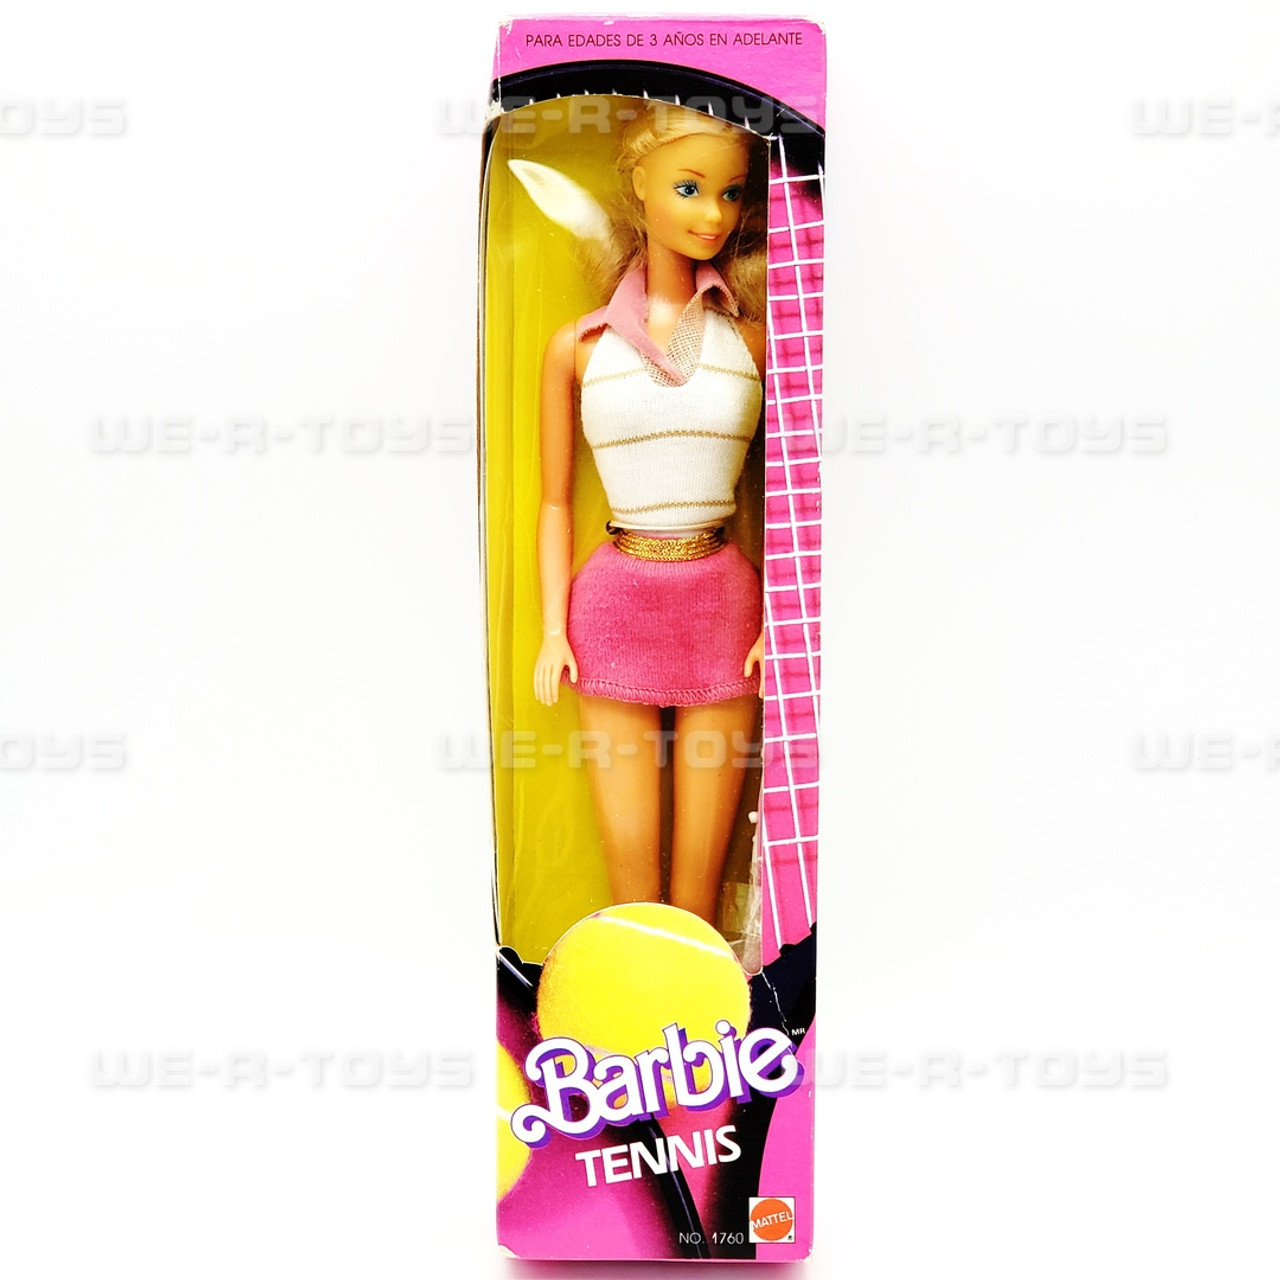 Barbie Tennis Doll Foreign Release Mexican Edition Mattel 1986 No 